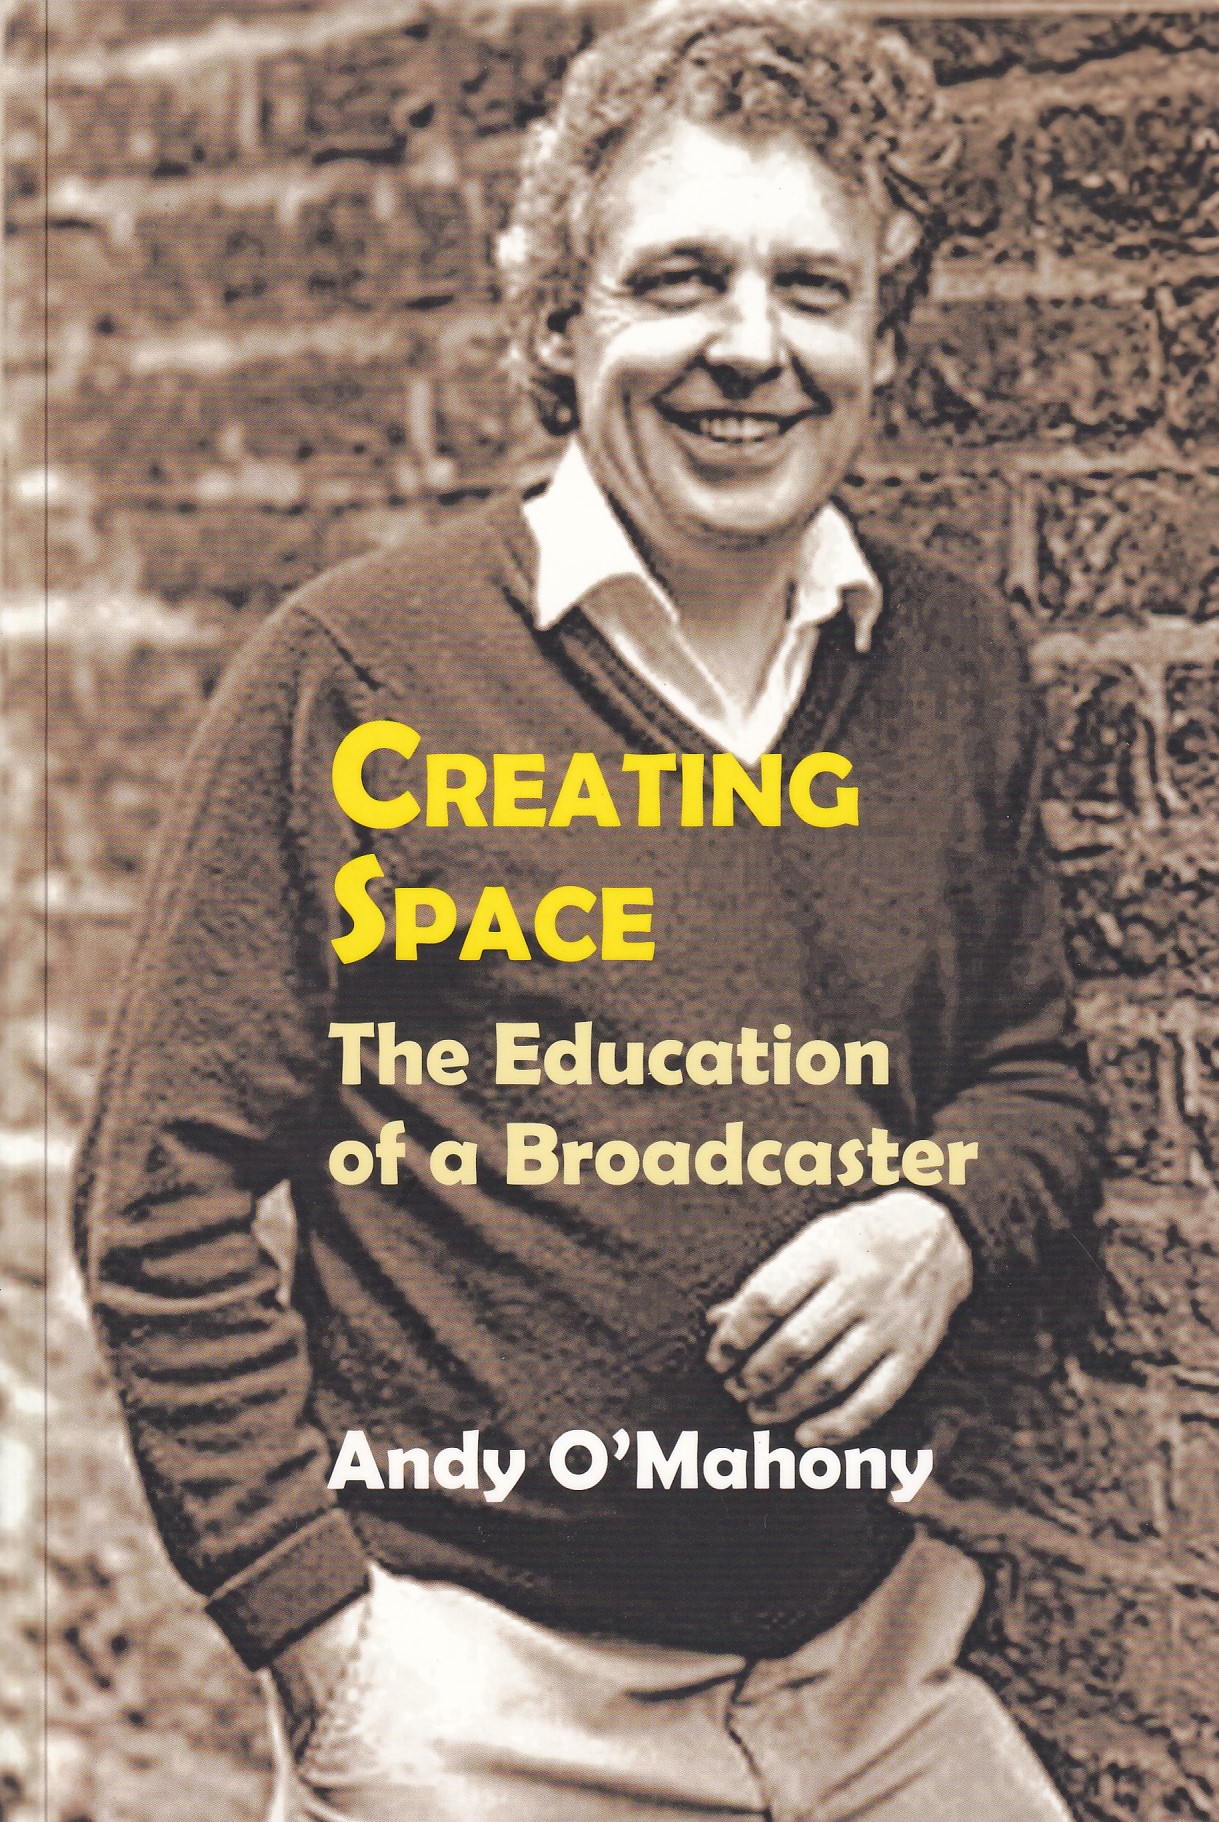 Creating Space: The Education of a Broadcaster by Andy O'Mahony